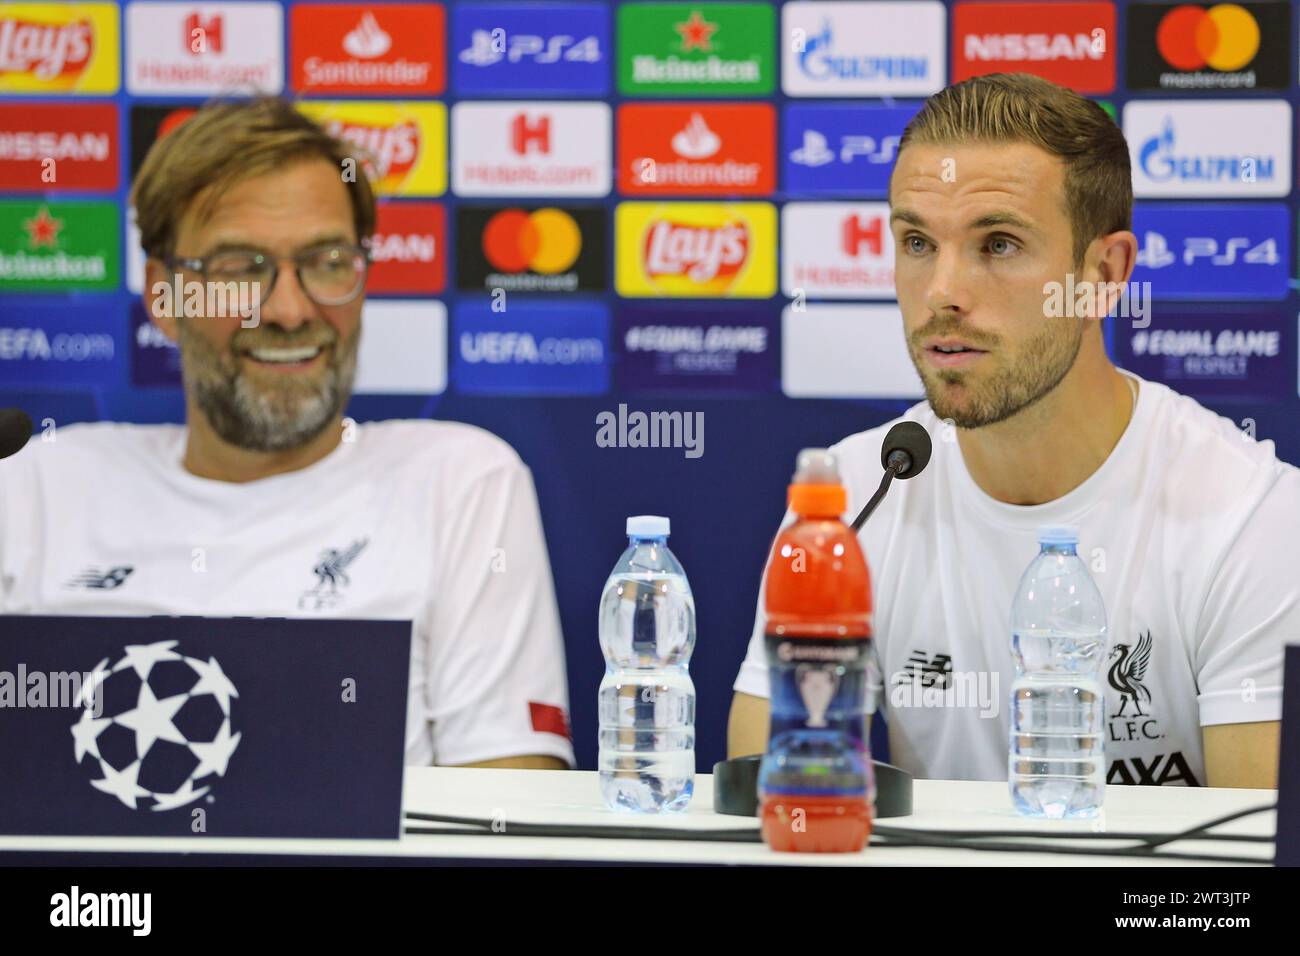 Liverpool coach, Jurgen Klopp, and Liverpool soccer player, Jordan Henderson, during the press conference at the San Paolo stadium, the day before the Stock Photo